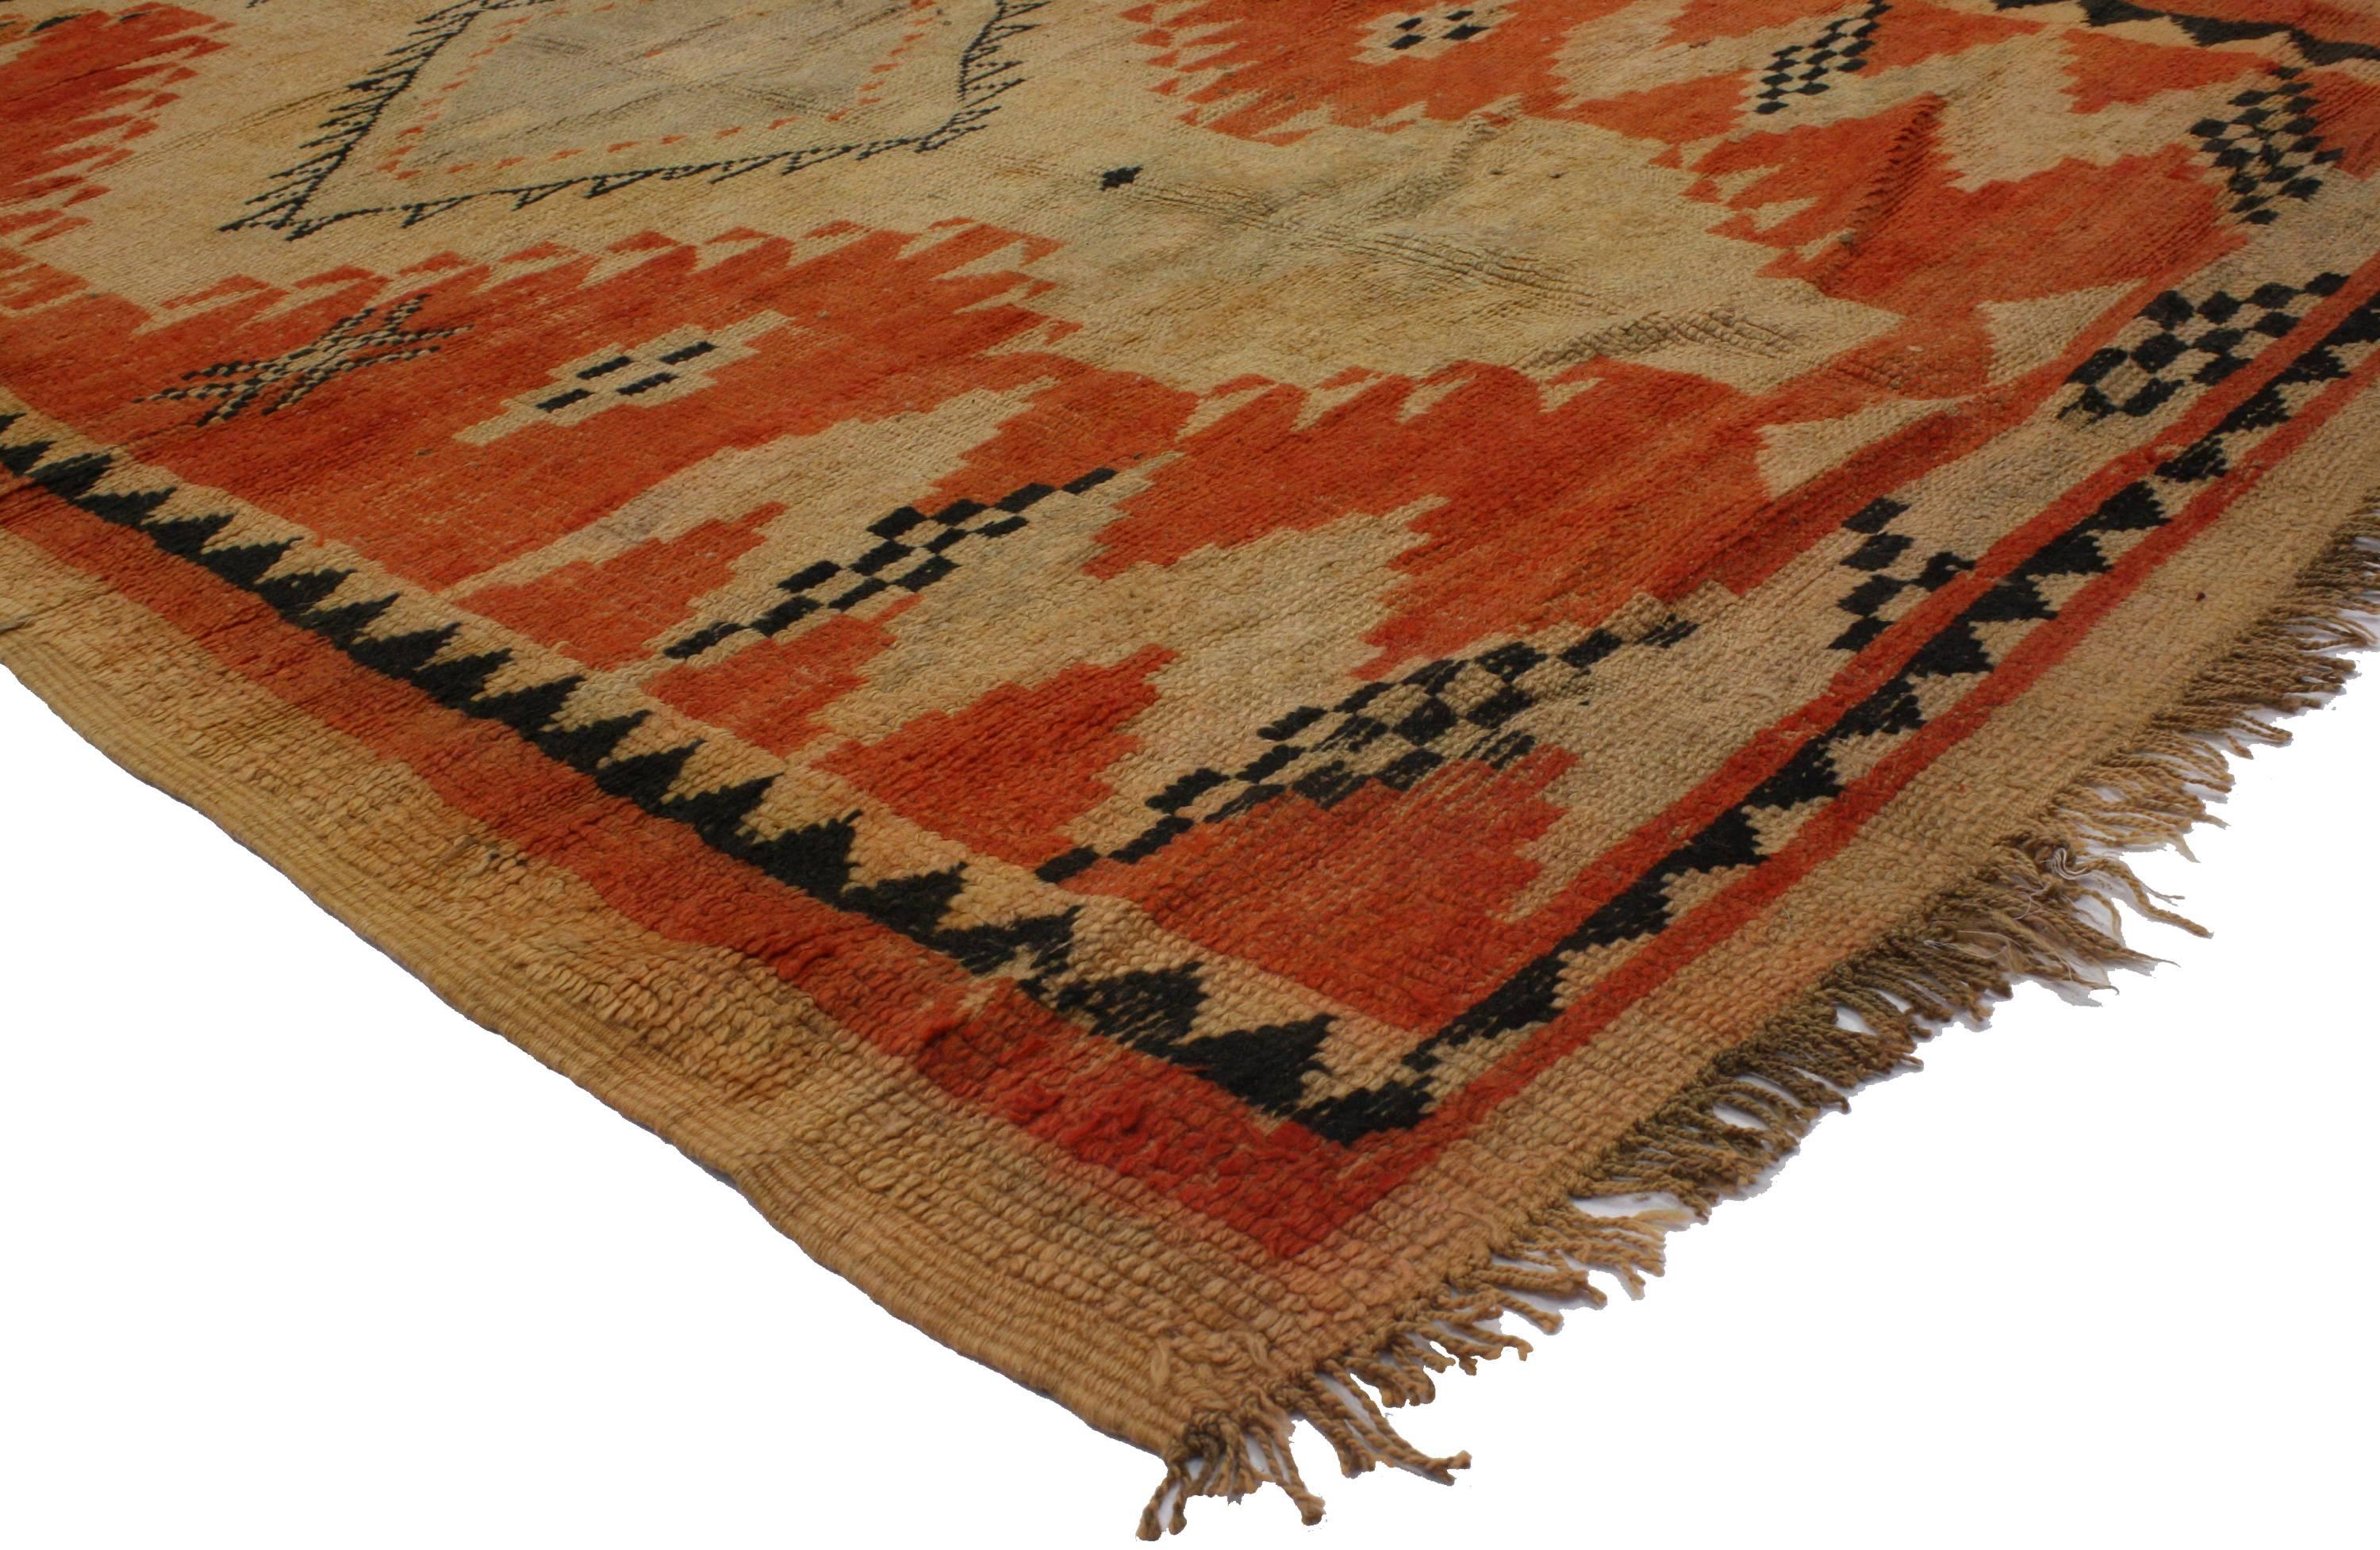 This beautifully composed vintage Berber Moroccan runner with tribal design was handmade by the Berber Tribes of Morocco in the mid-20th century. With its distinct tribal style and characterized by a beautifully abrashed field, this Moroccan runner